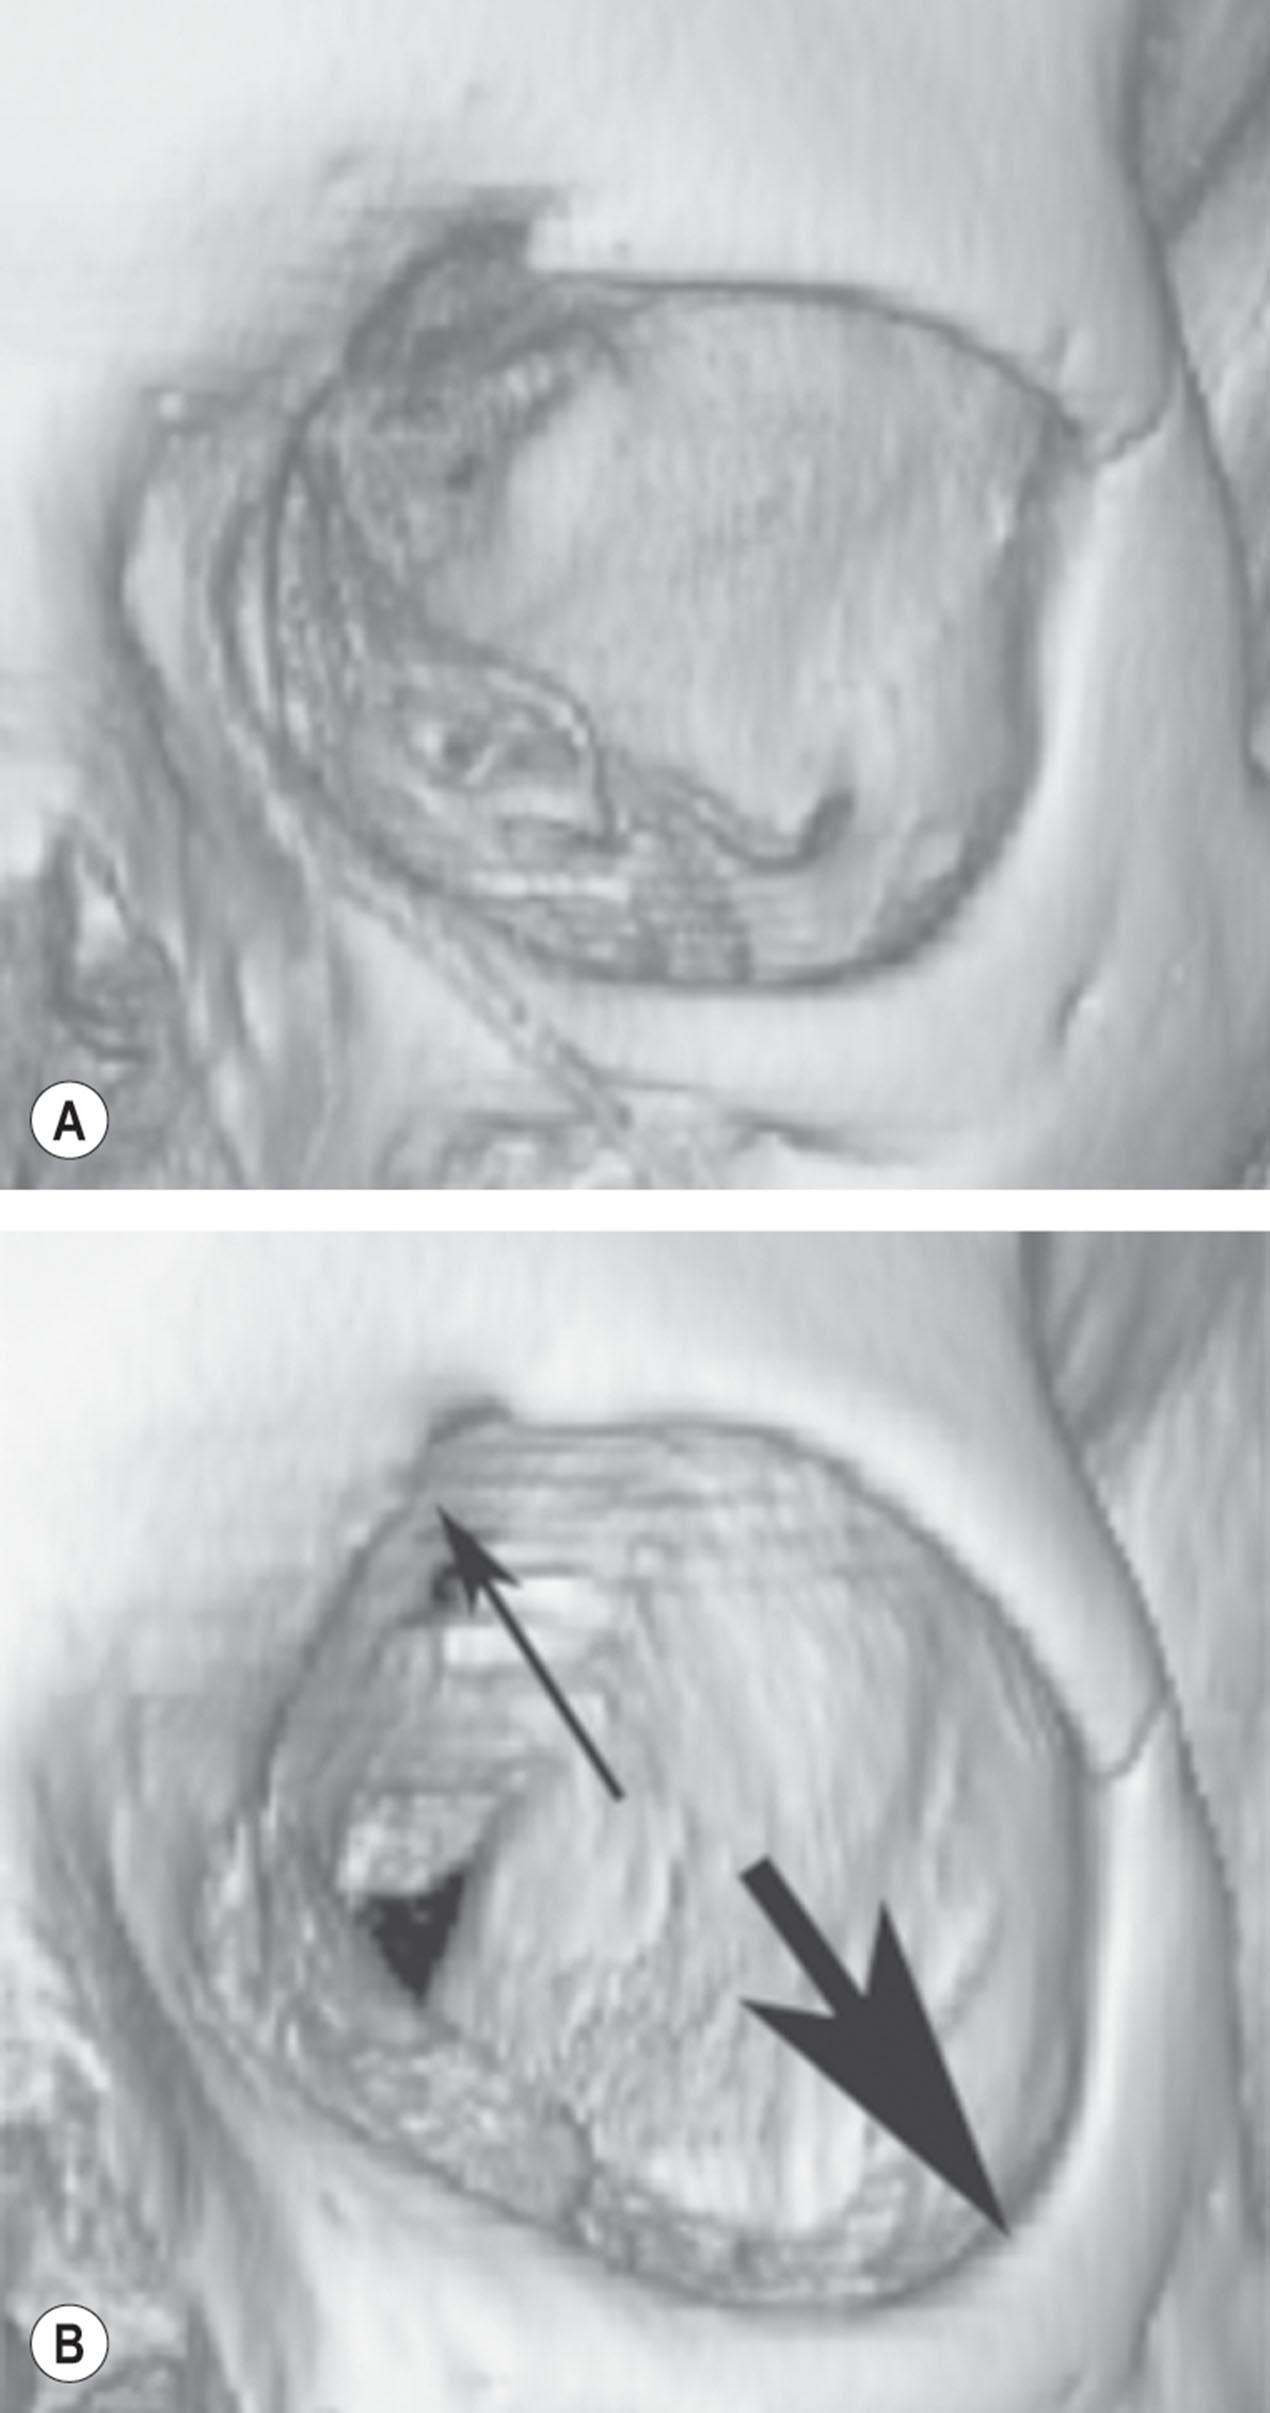 Figure 9.3.11, Computed tomography scans of (A) a male patient in the younger age group and (B) a male patient in the older age group. The image from the older age group shows significant bony remodeling (arrows) both superomedially and inferolaterally.